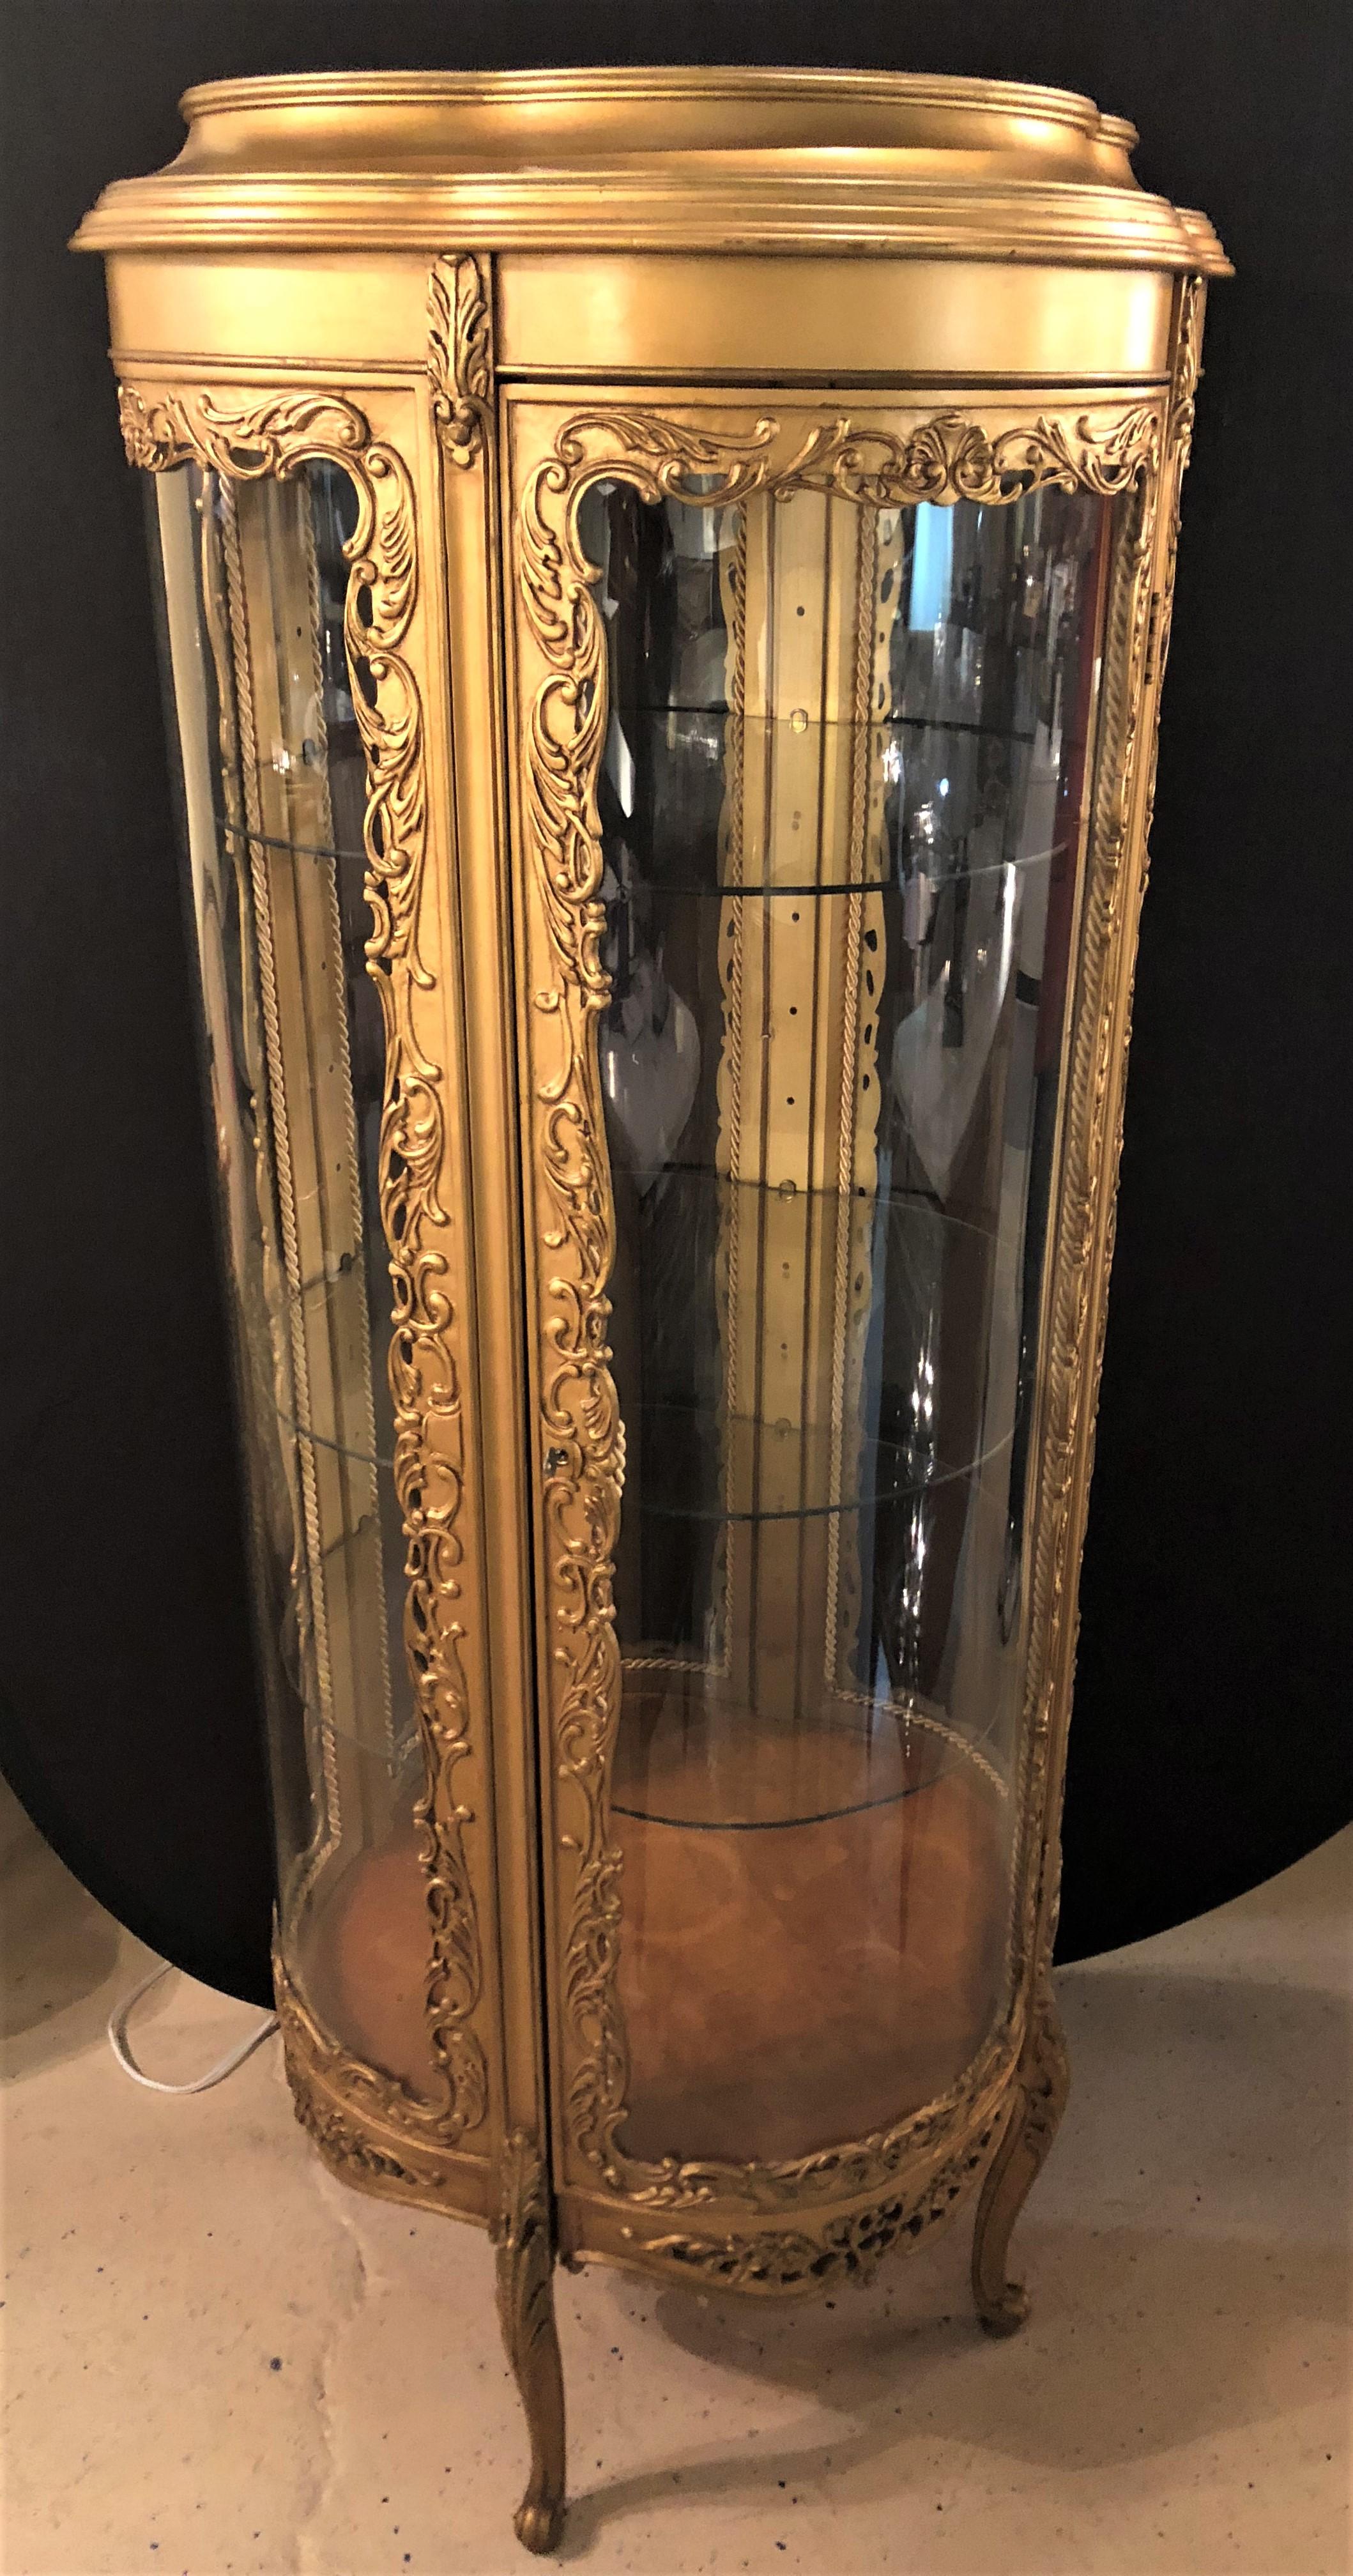 A wonderful Louis XV style clover circular giltwood lighted curio vitrine showcase. This simply stunning curio has a lighted interior along with three adjustable shelves in a round serpentine shape. The double clover like shape make this finely gilt